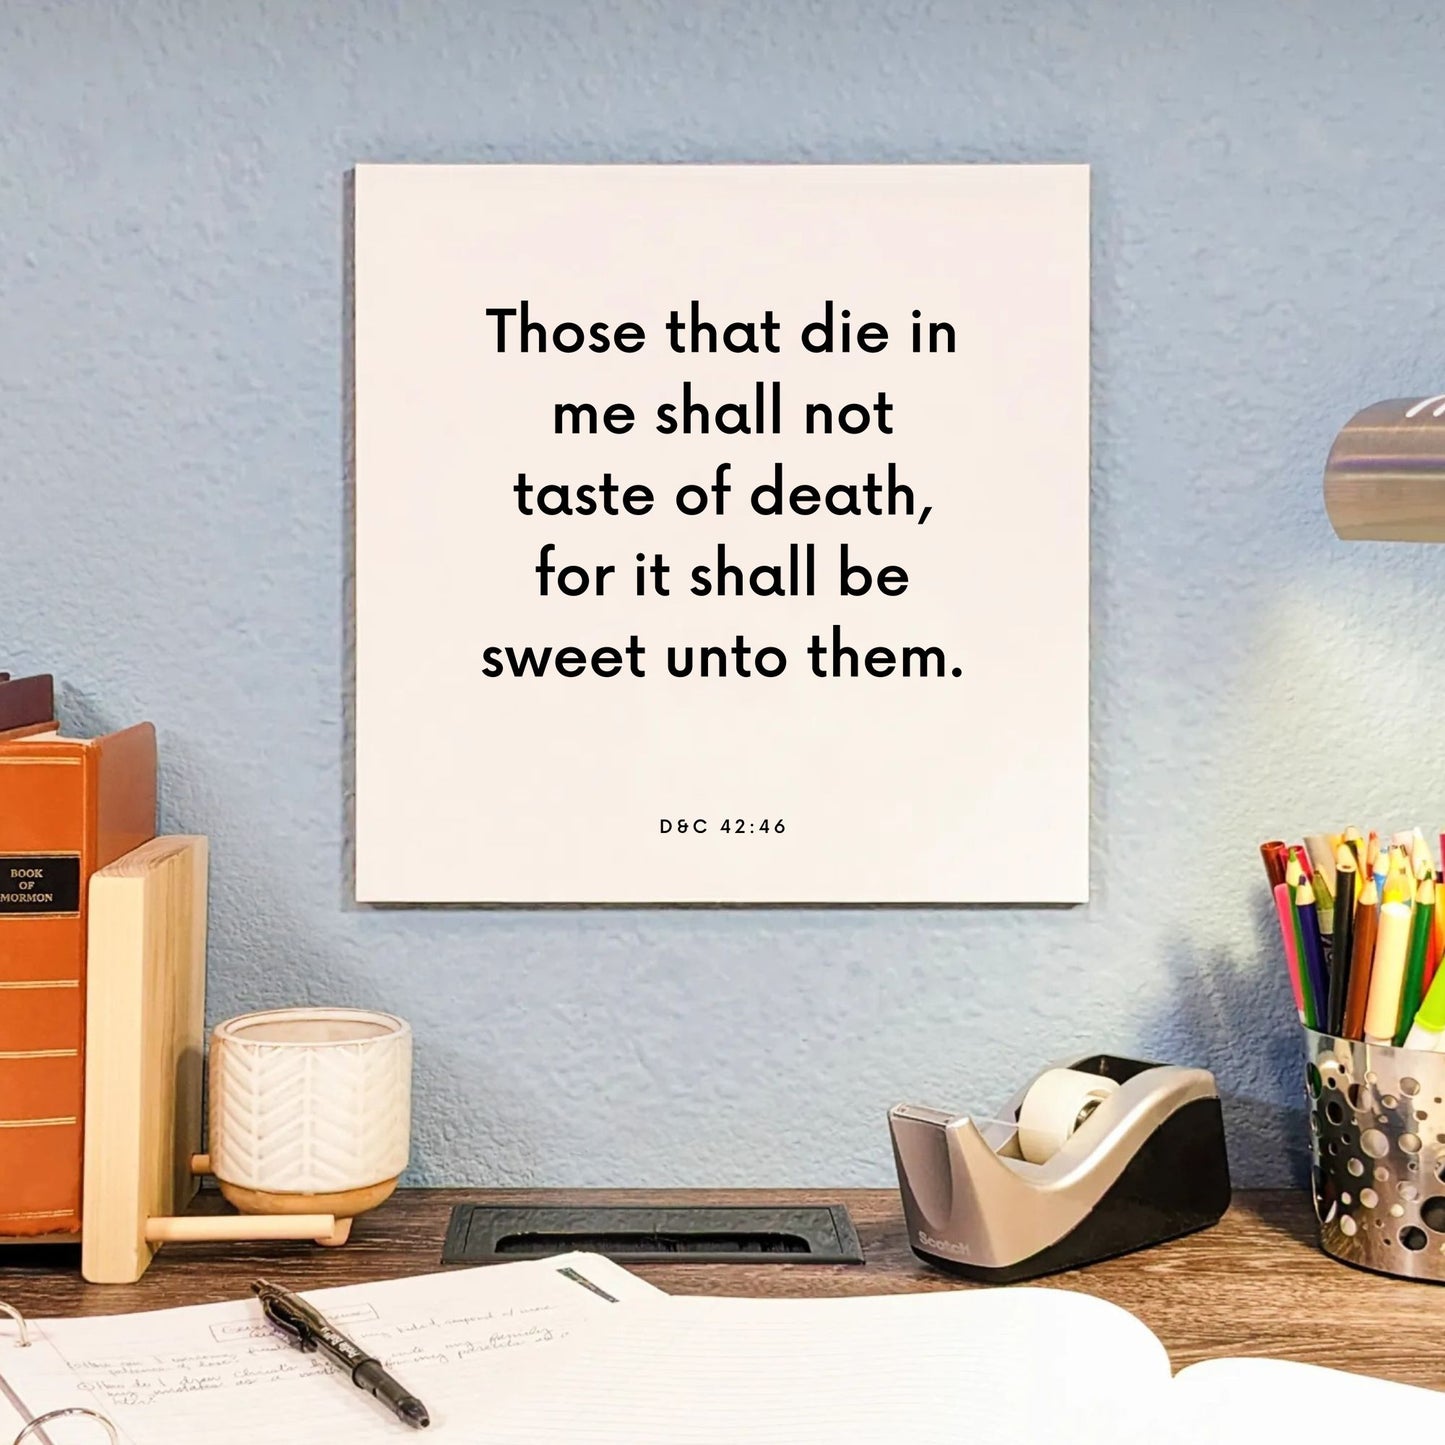 Desk mouting of the scripture tile for D&C 42:46 - "Those that die in me shall not taste of death"